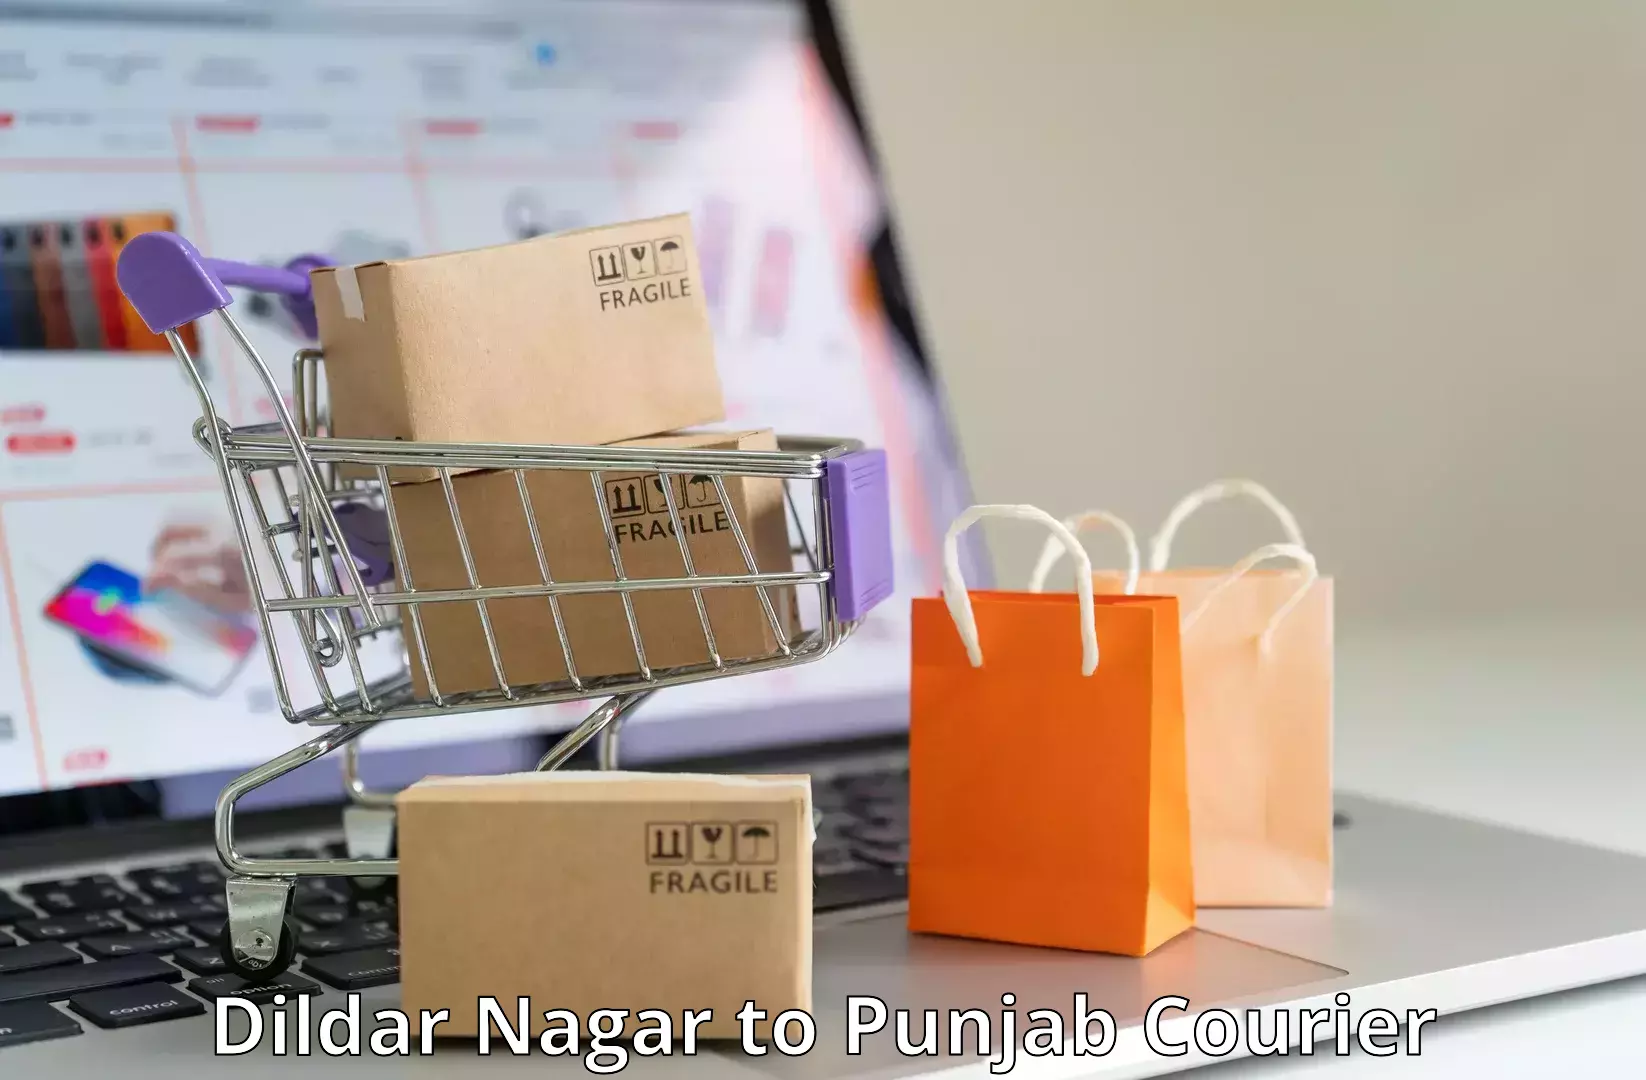 Full-service courier options Dildar Nagar to Mohali